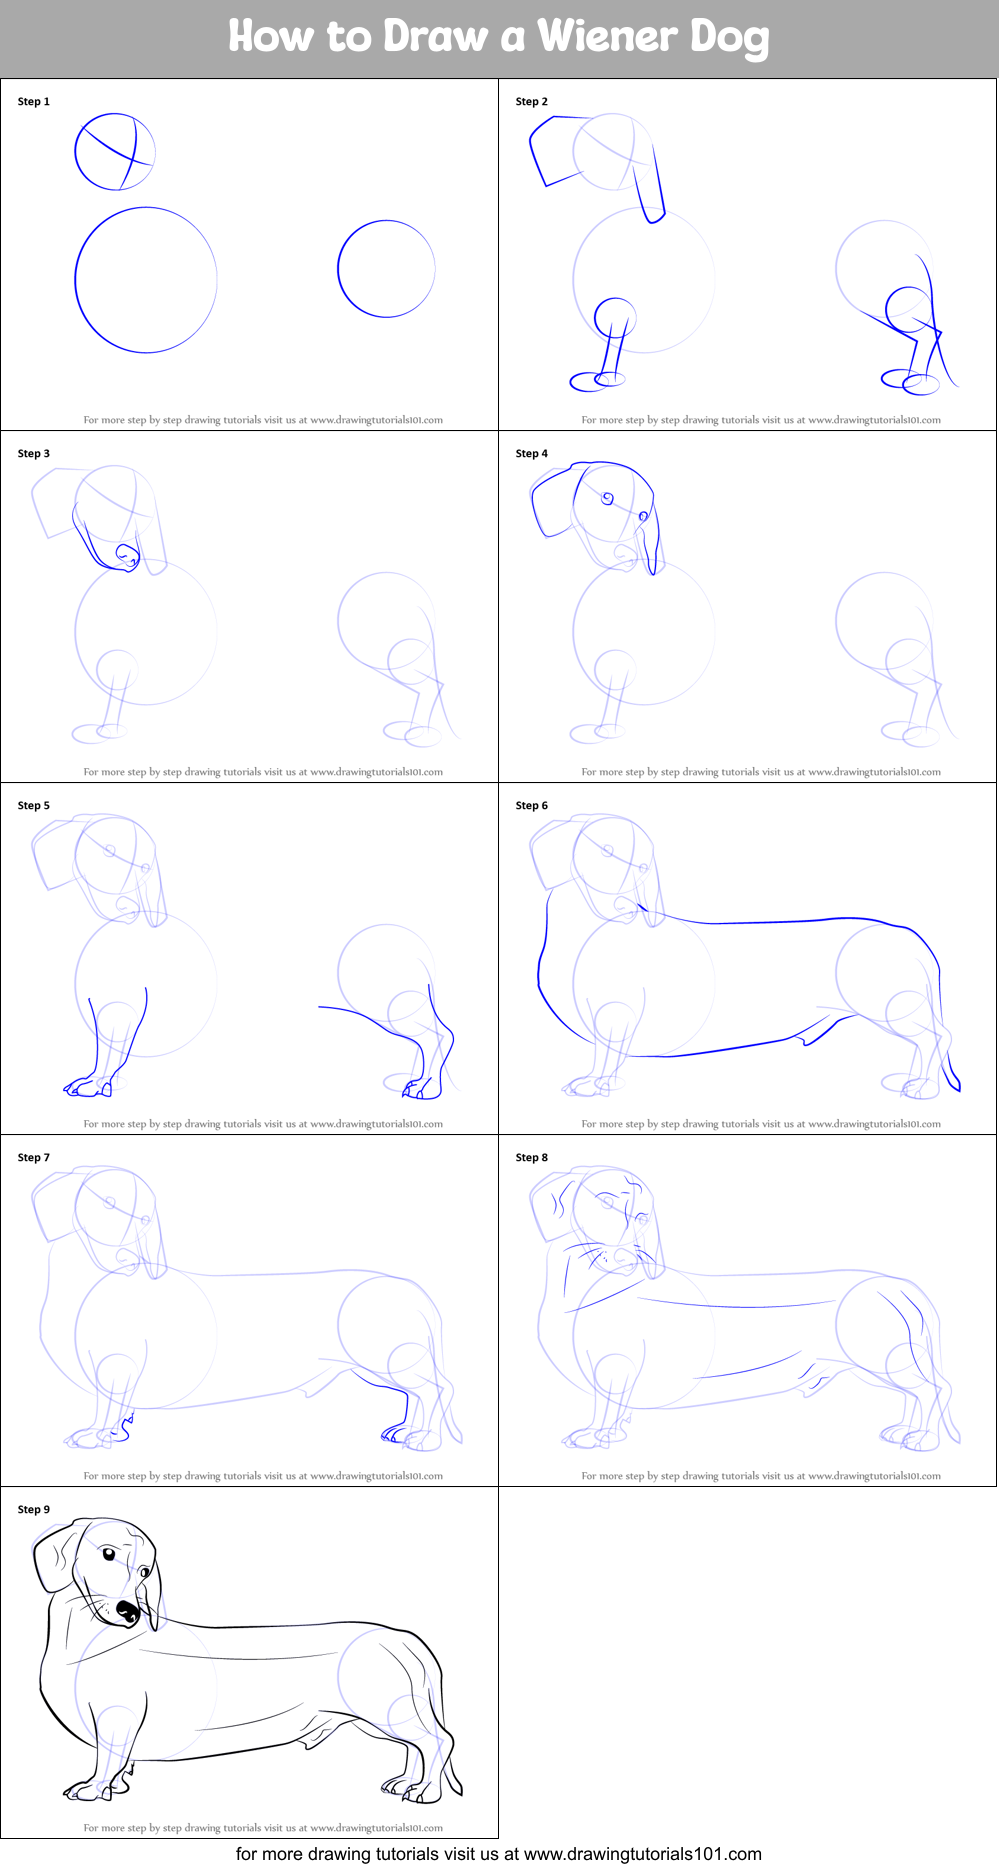 How to Draw a Wiener Dog printable step by step drawing sheet